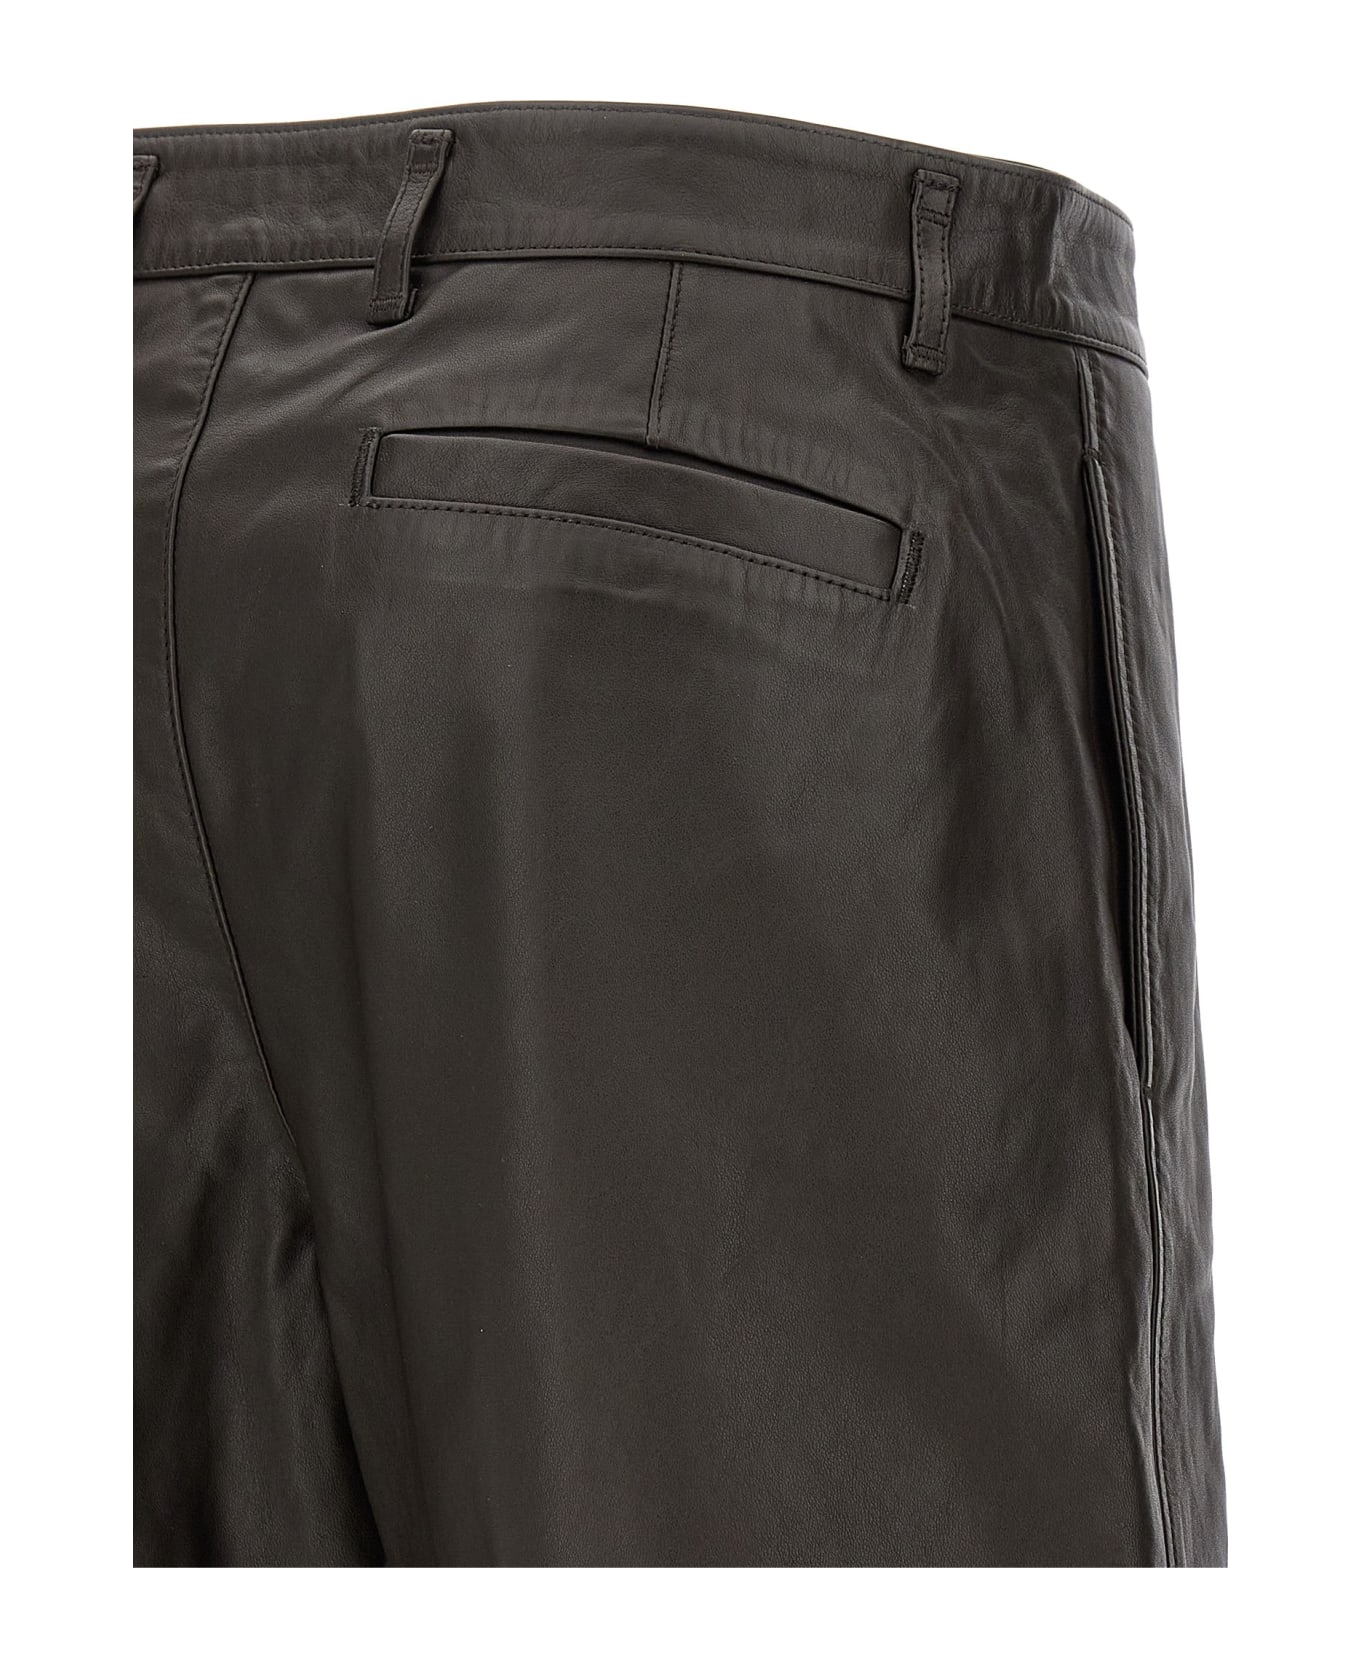 Lemaire Leather Bermuda Shorts - BROWN